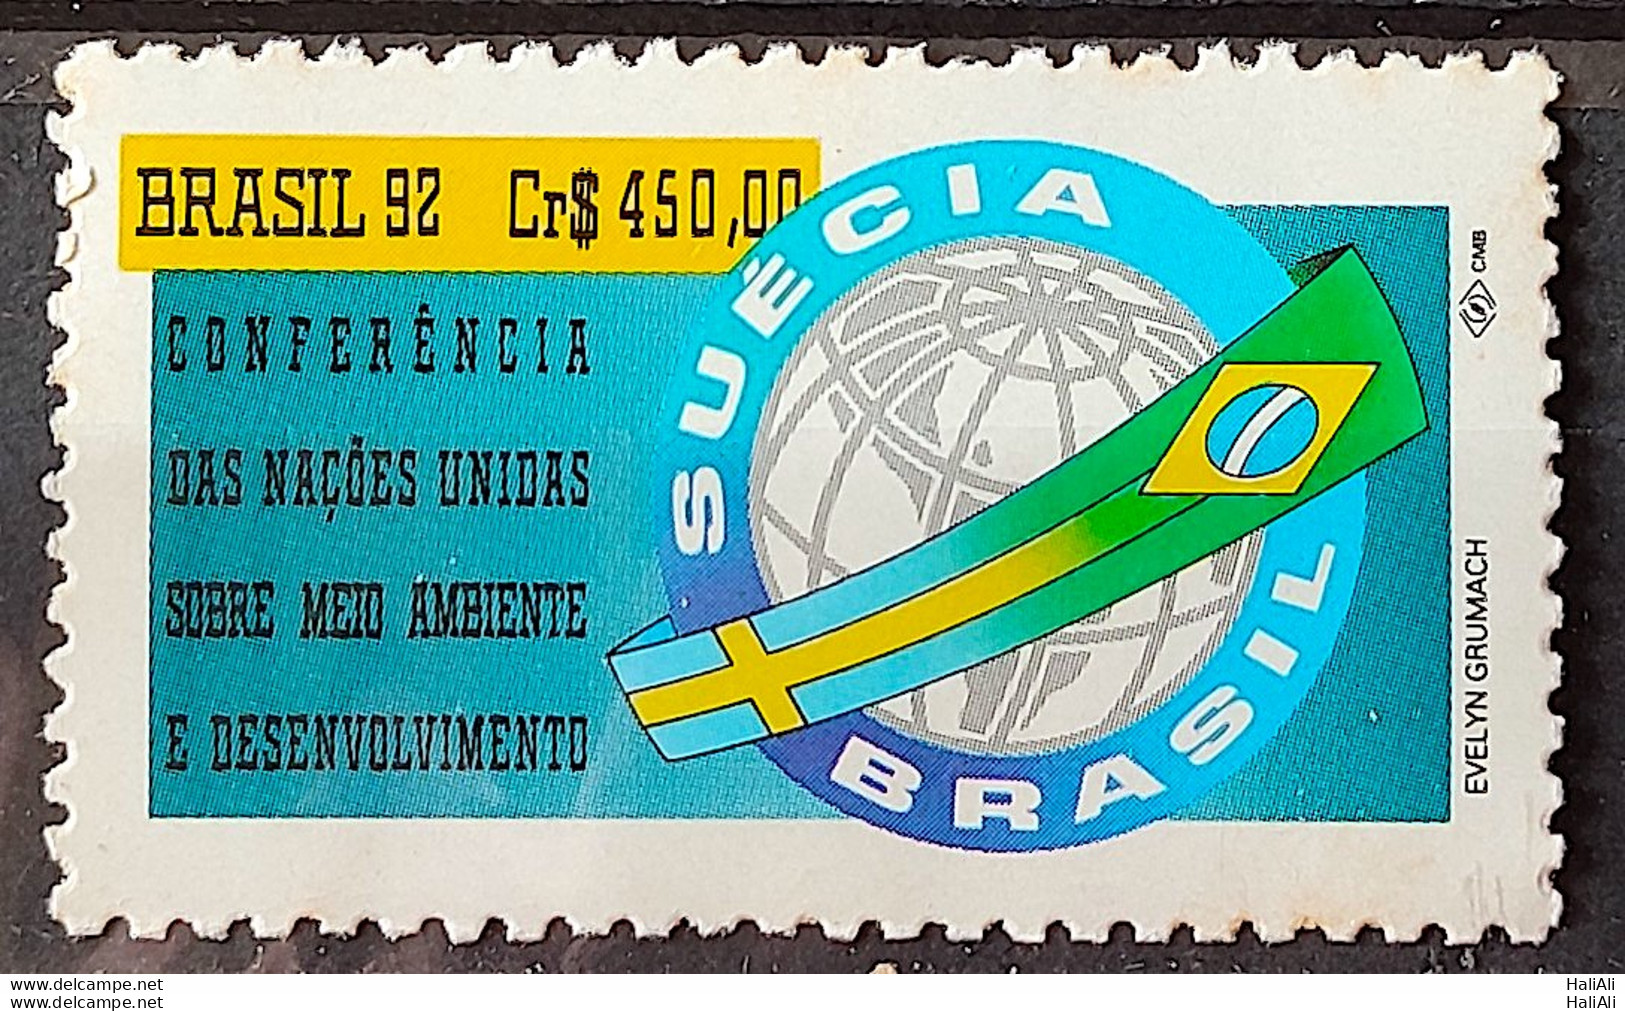 C 1798 Brazil Stamp Conference Eco 92 Rio De Janeiro Sweden Flag Environment 1992 1 - Unused Stamps